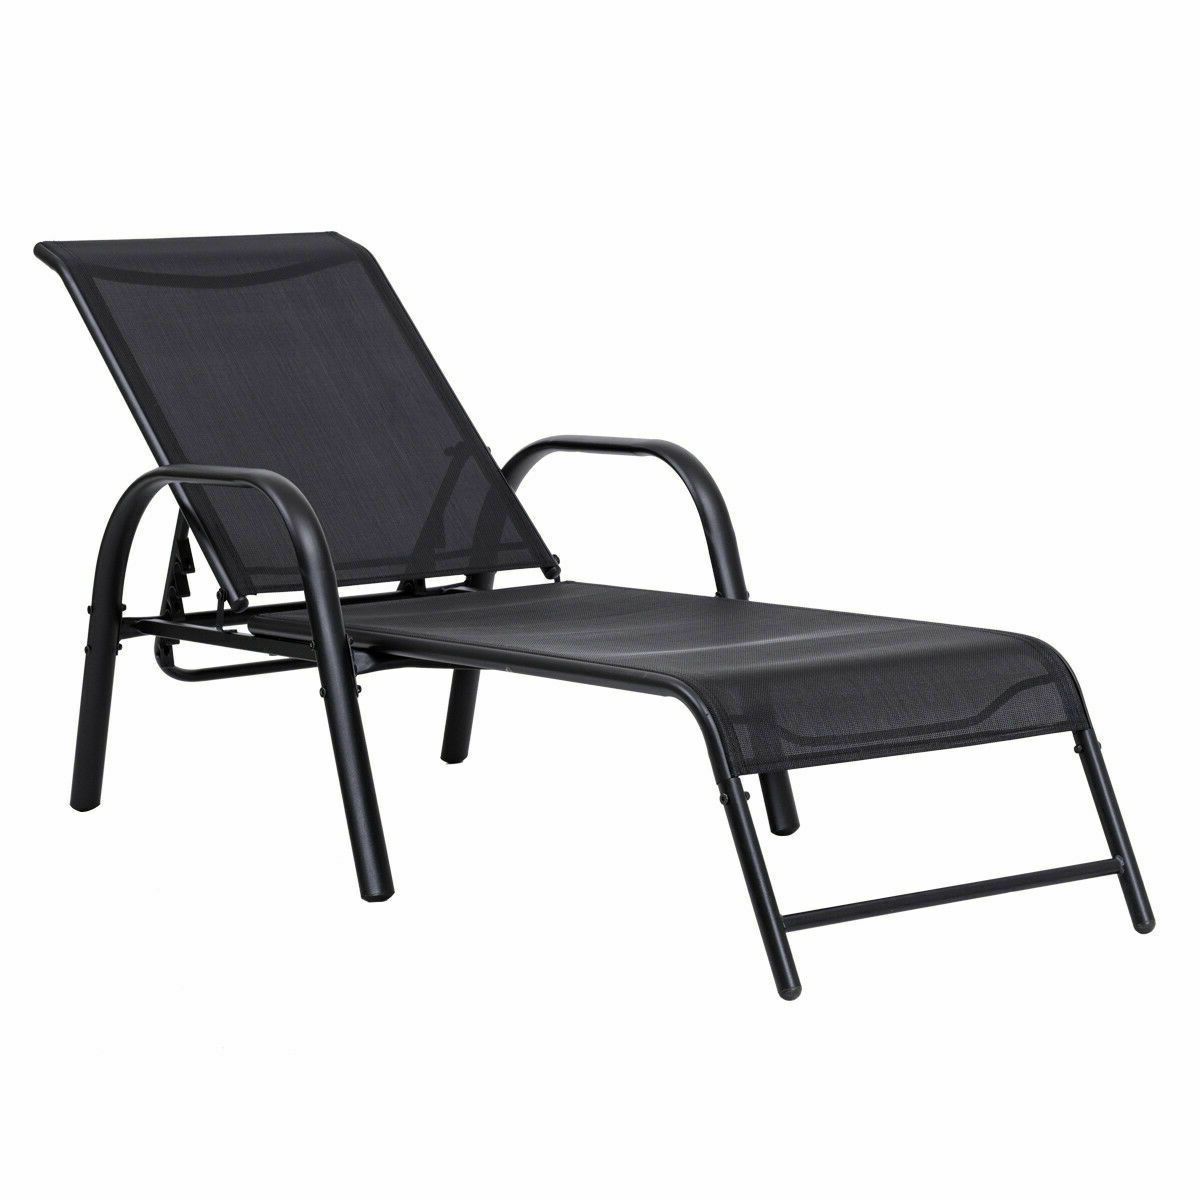 Favorite Outdoor Patio Chaise Lounge Chairs Sling Lounges Recliner Adjustable Back Inside Sling Patio Chaise Lounges (View 17 of 25)